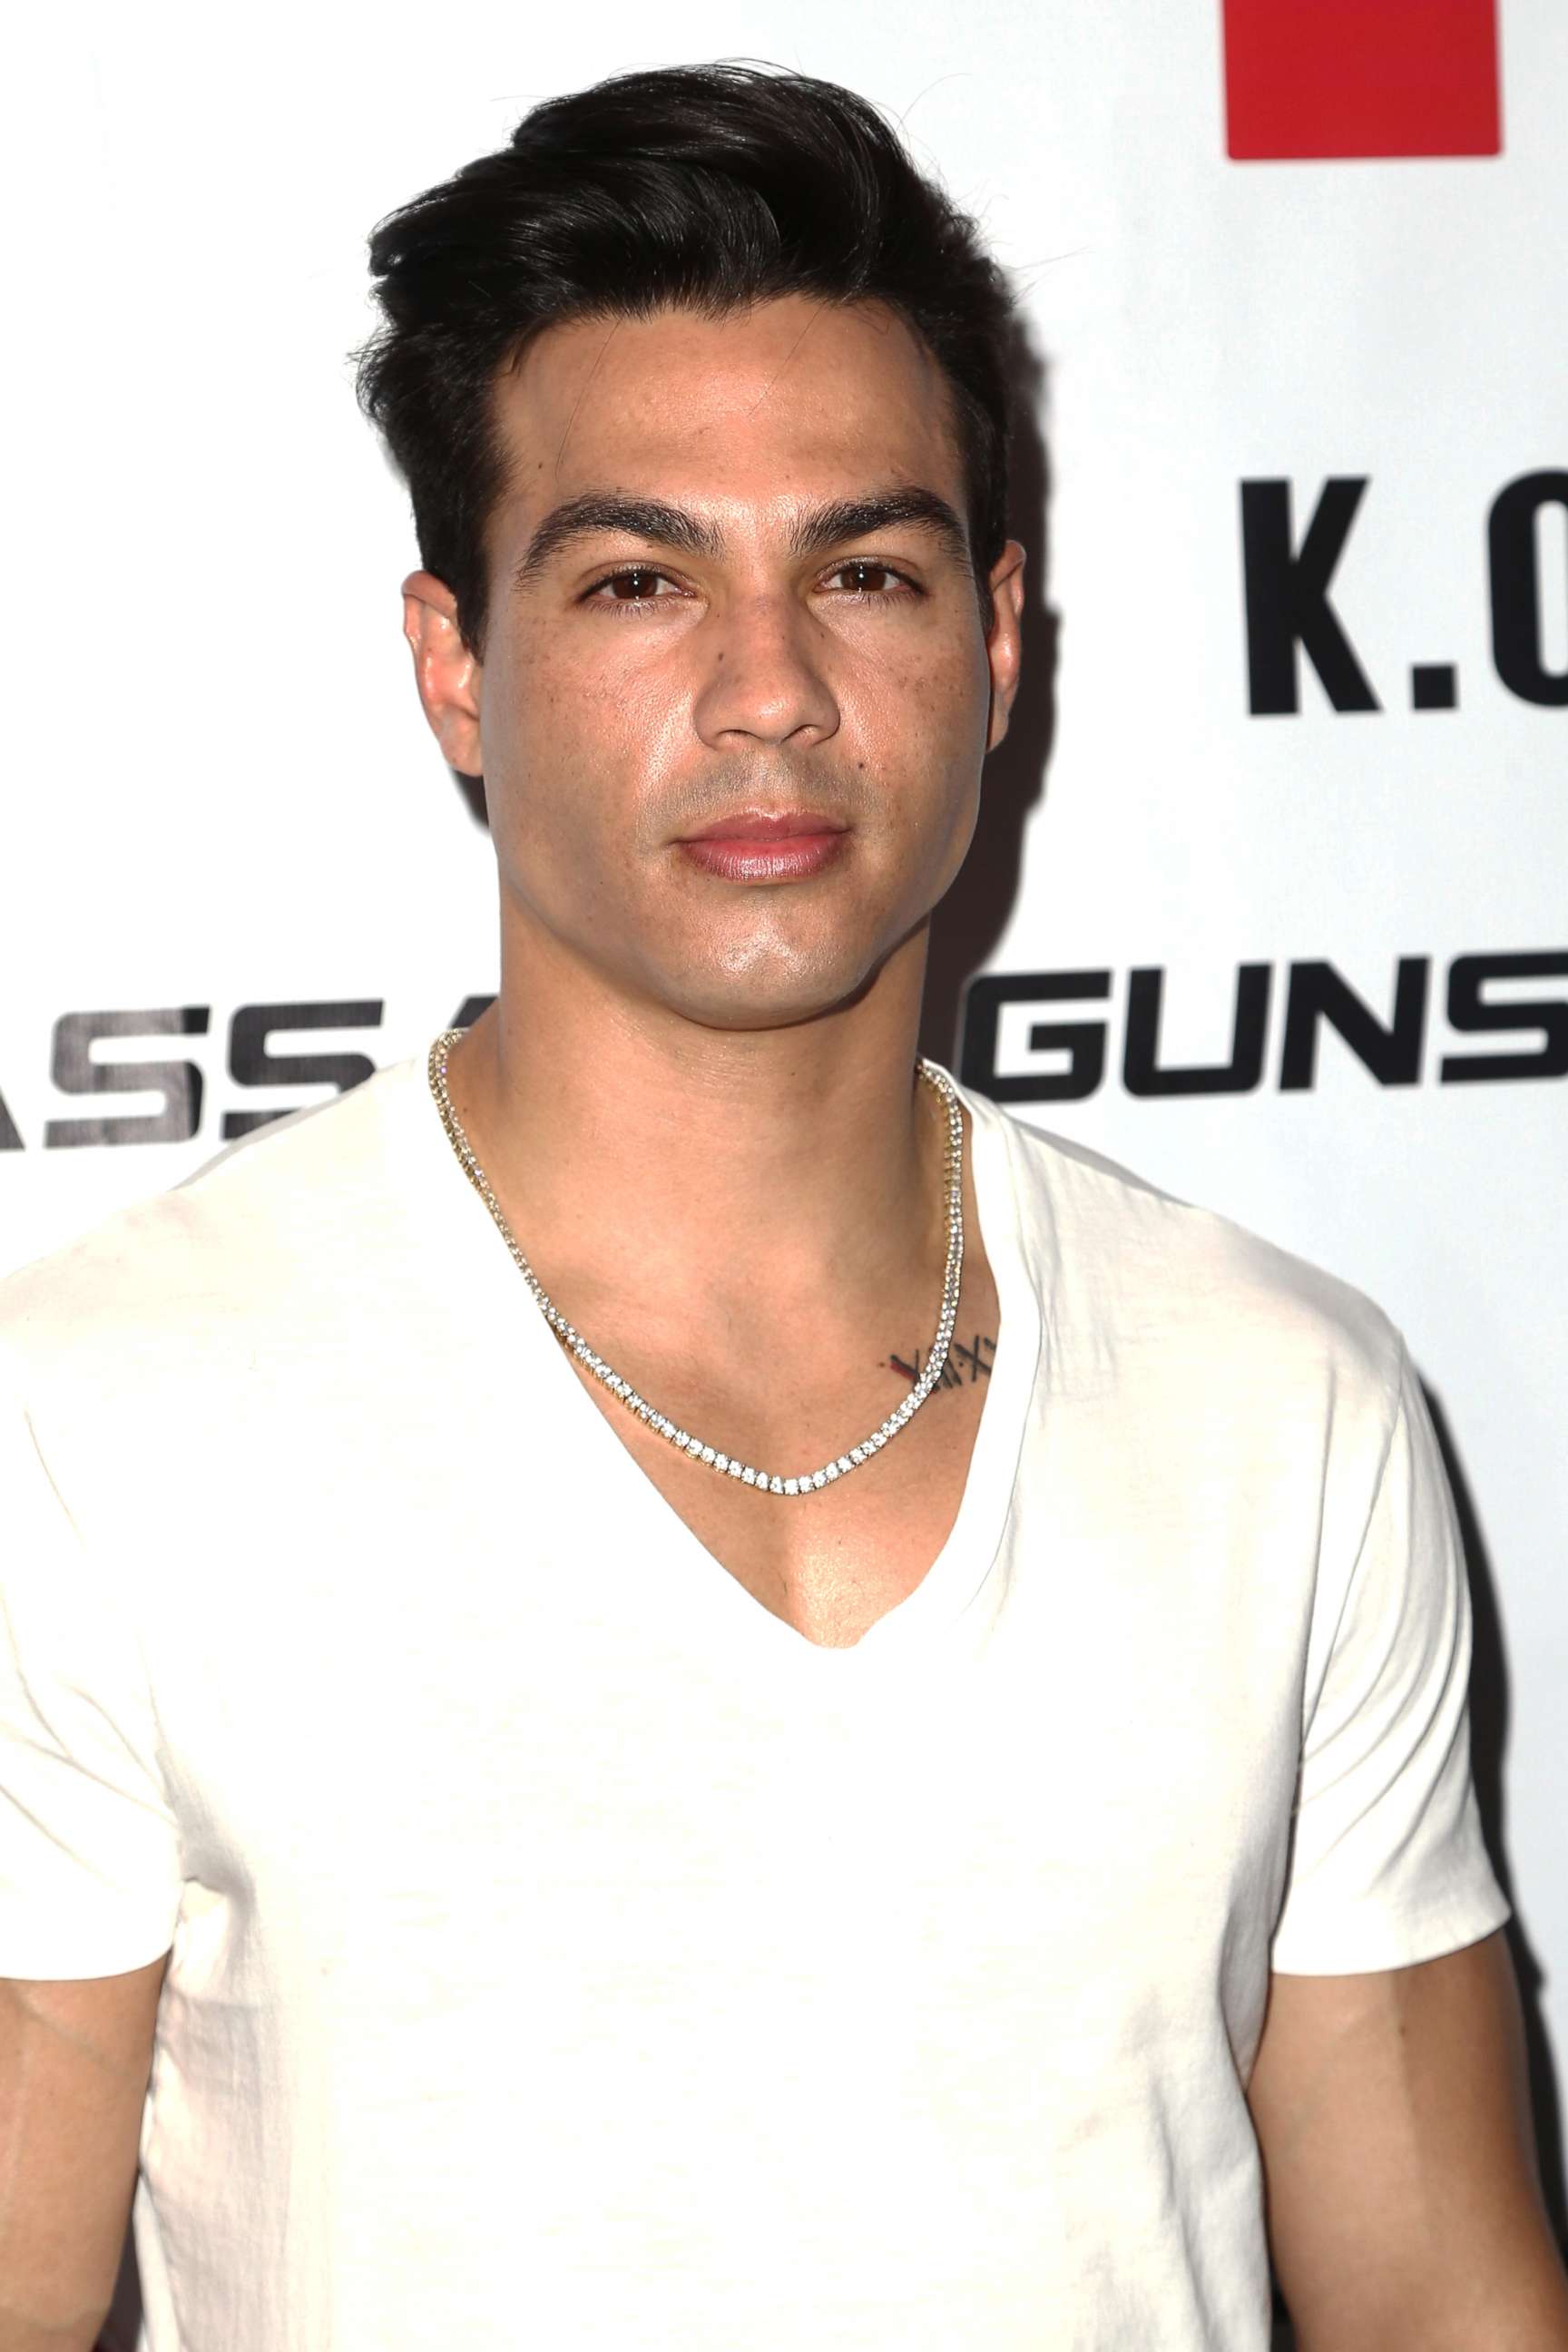 PHOTO: Ray Diaz attends an event on March 31, 2019, in Los Angeles